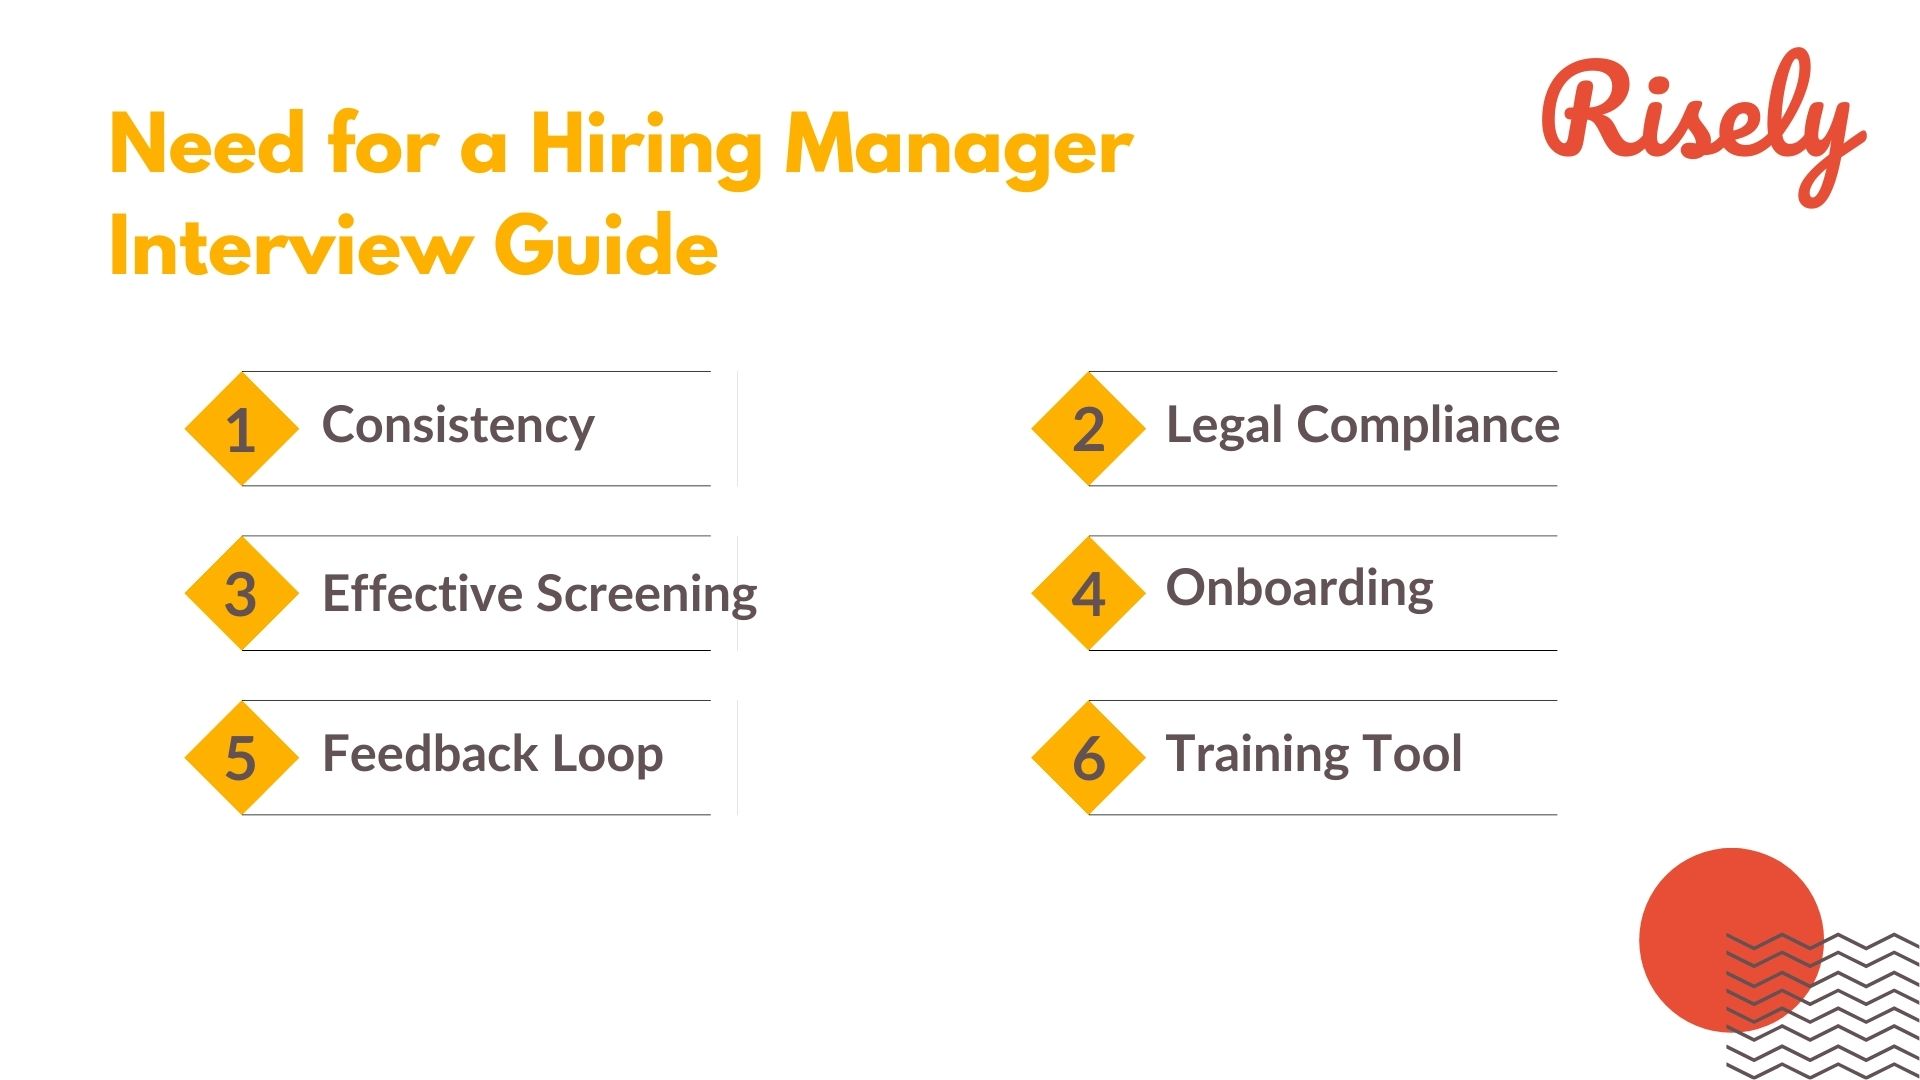 Mastering the Art of Hiring: A Comprehensive Hiring Manager Interview Guide